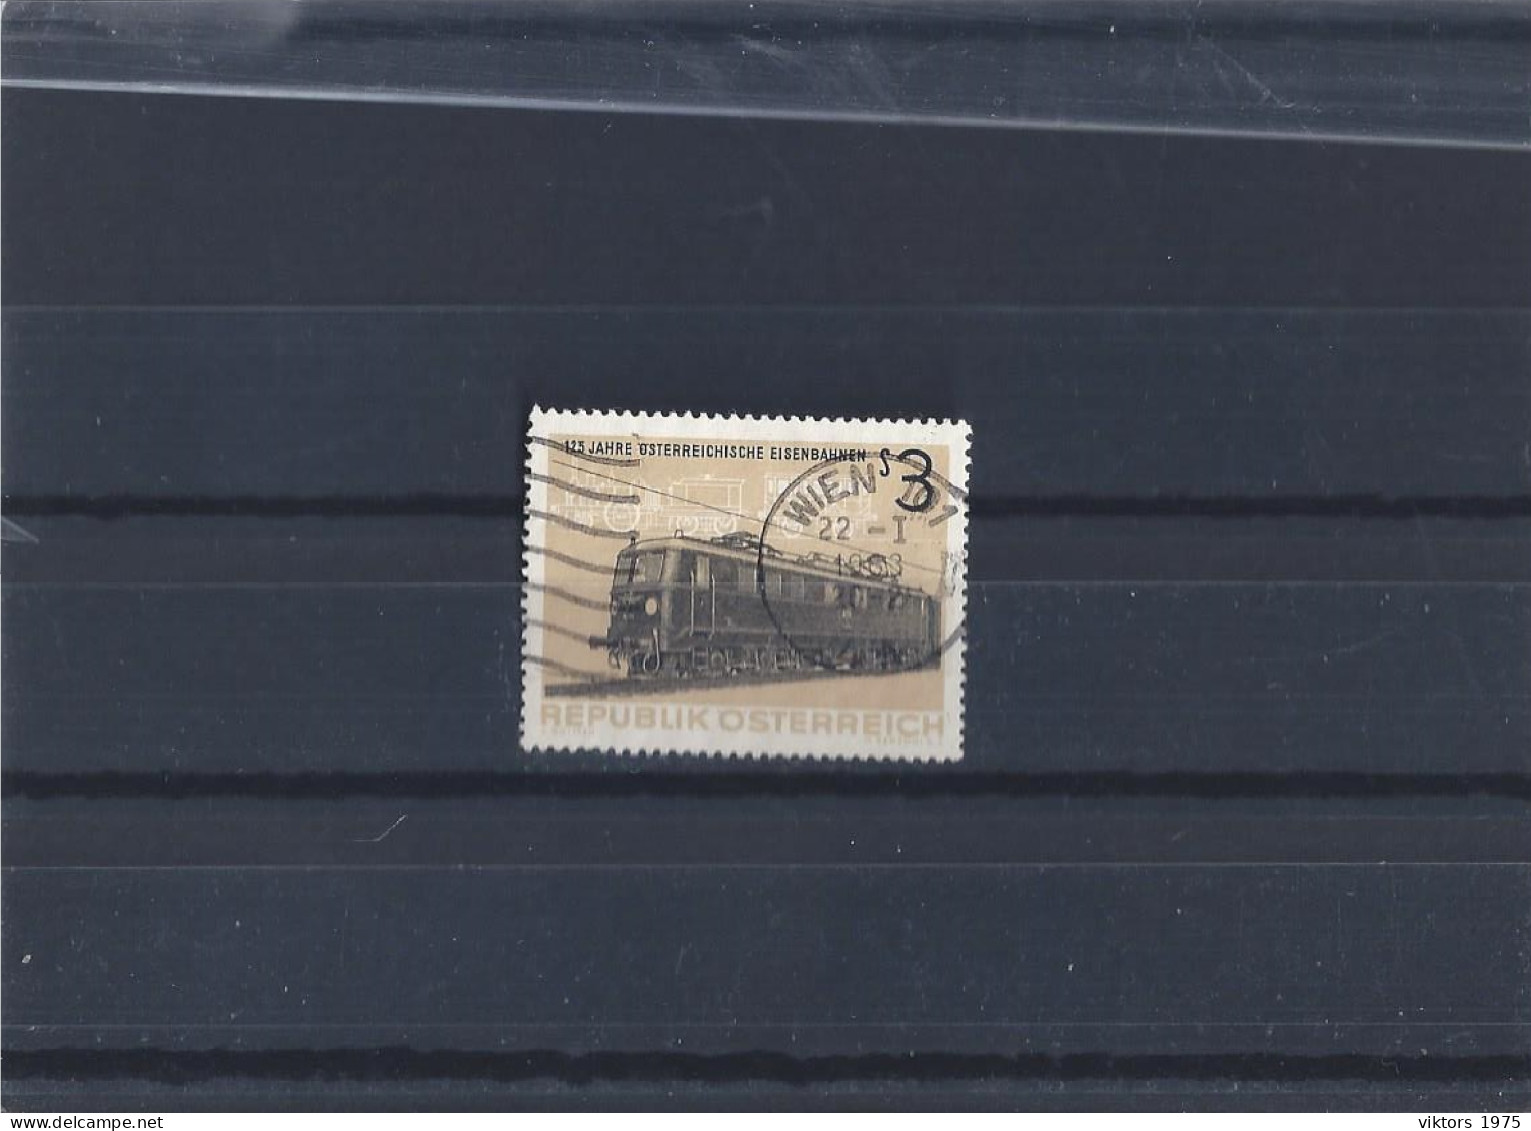 Used Stamp Nr.1126 In MICHEL Catalog - Used Stamps